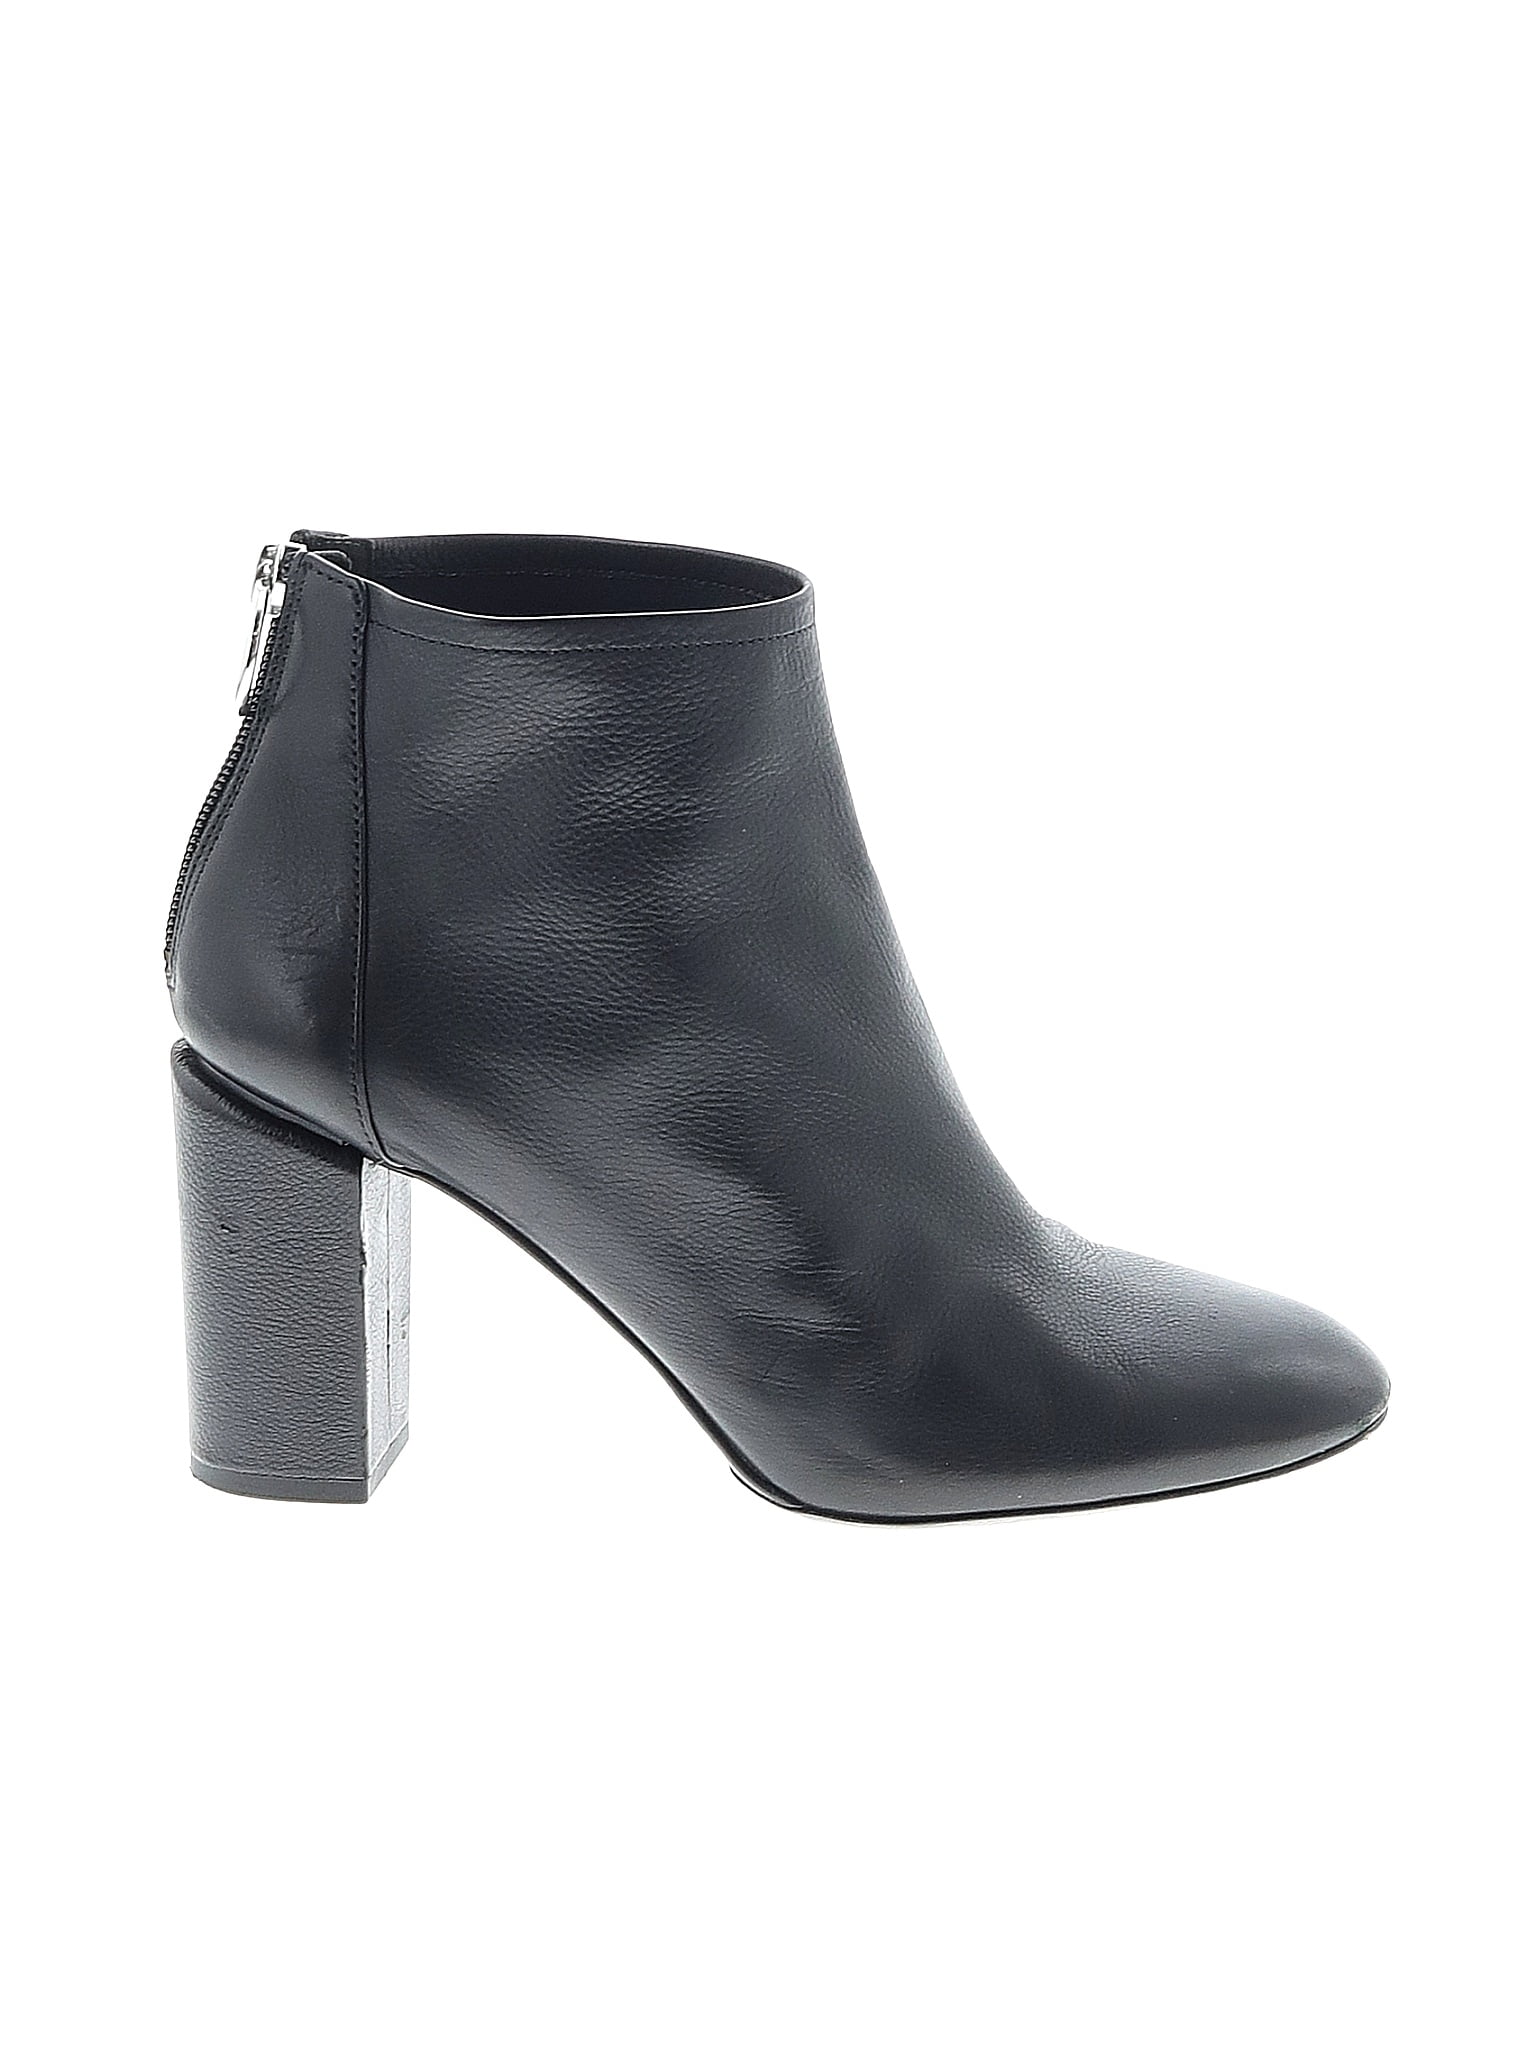 Via Spiga Solid Black Ankle Boots Size 7 1/2 - 78% off